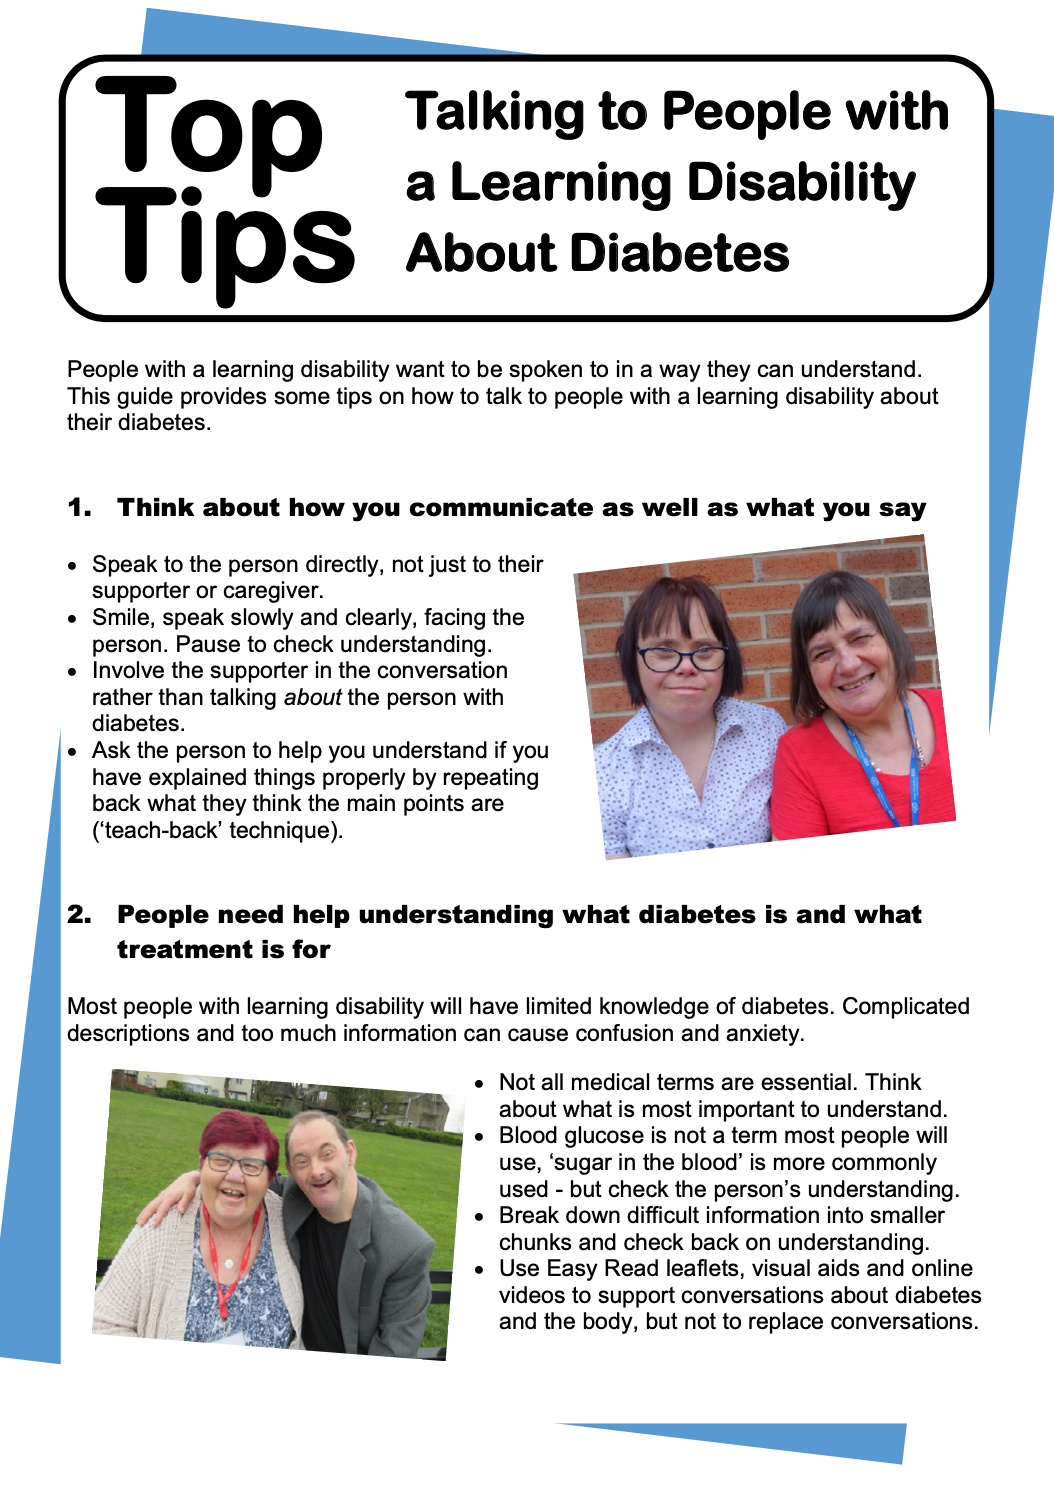 Talking to People with a Learning Disability about Diabetes